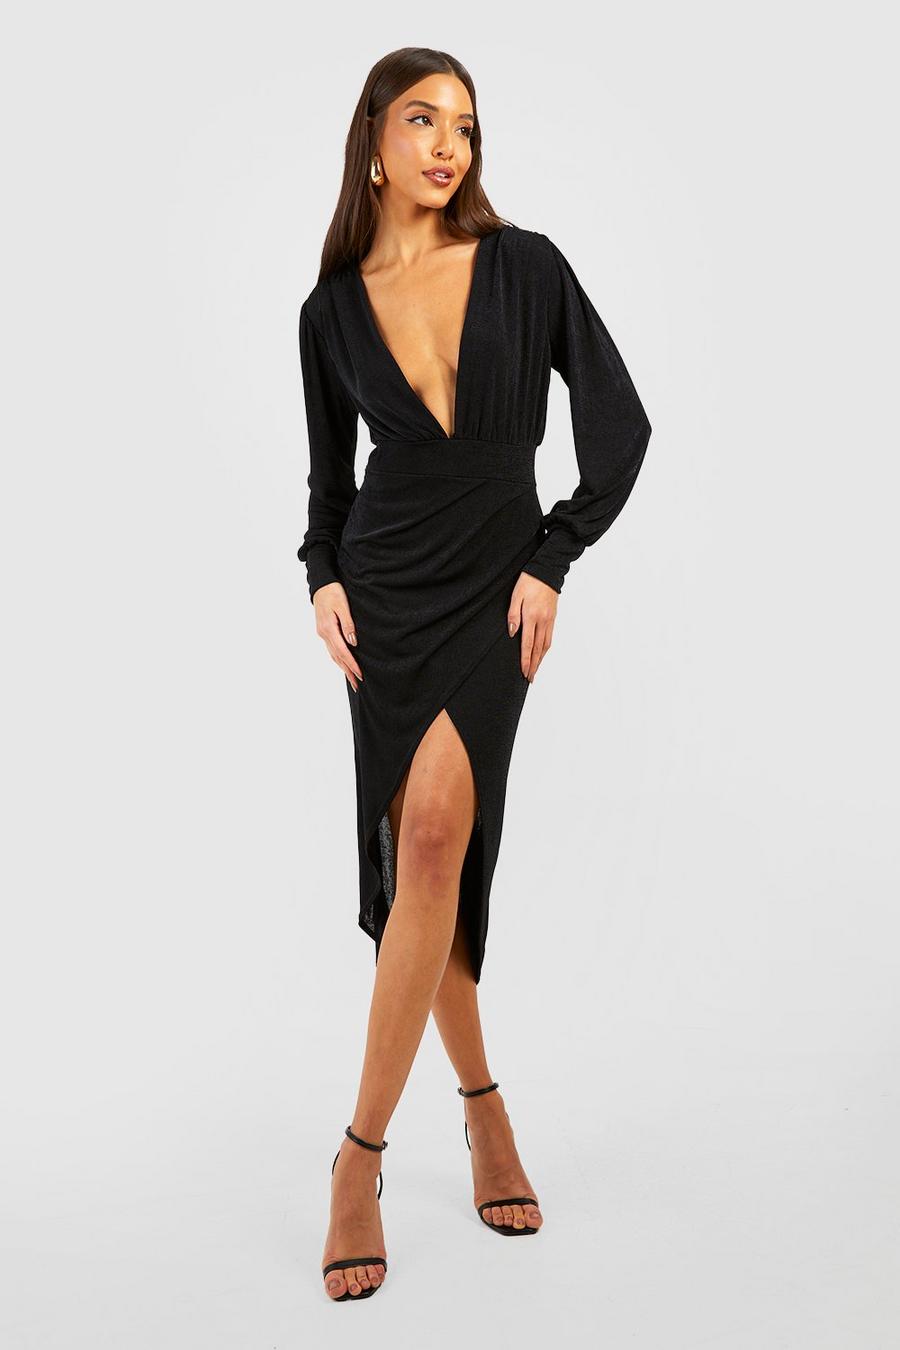 Black Textured Slinky Rouched Wrap Dress